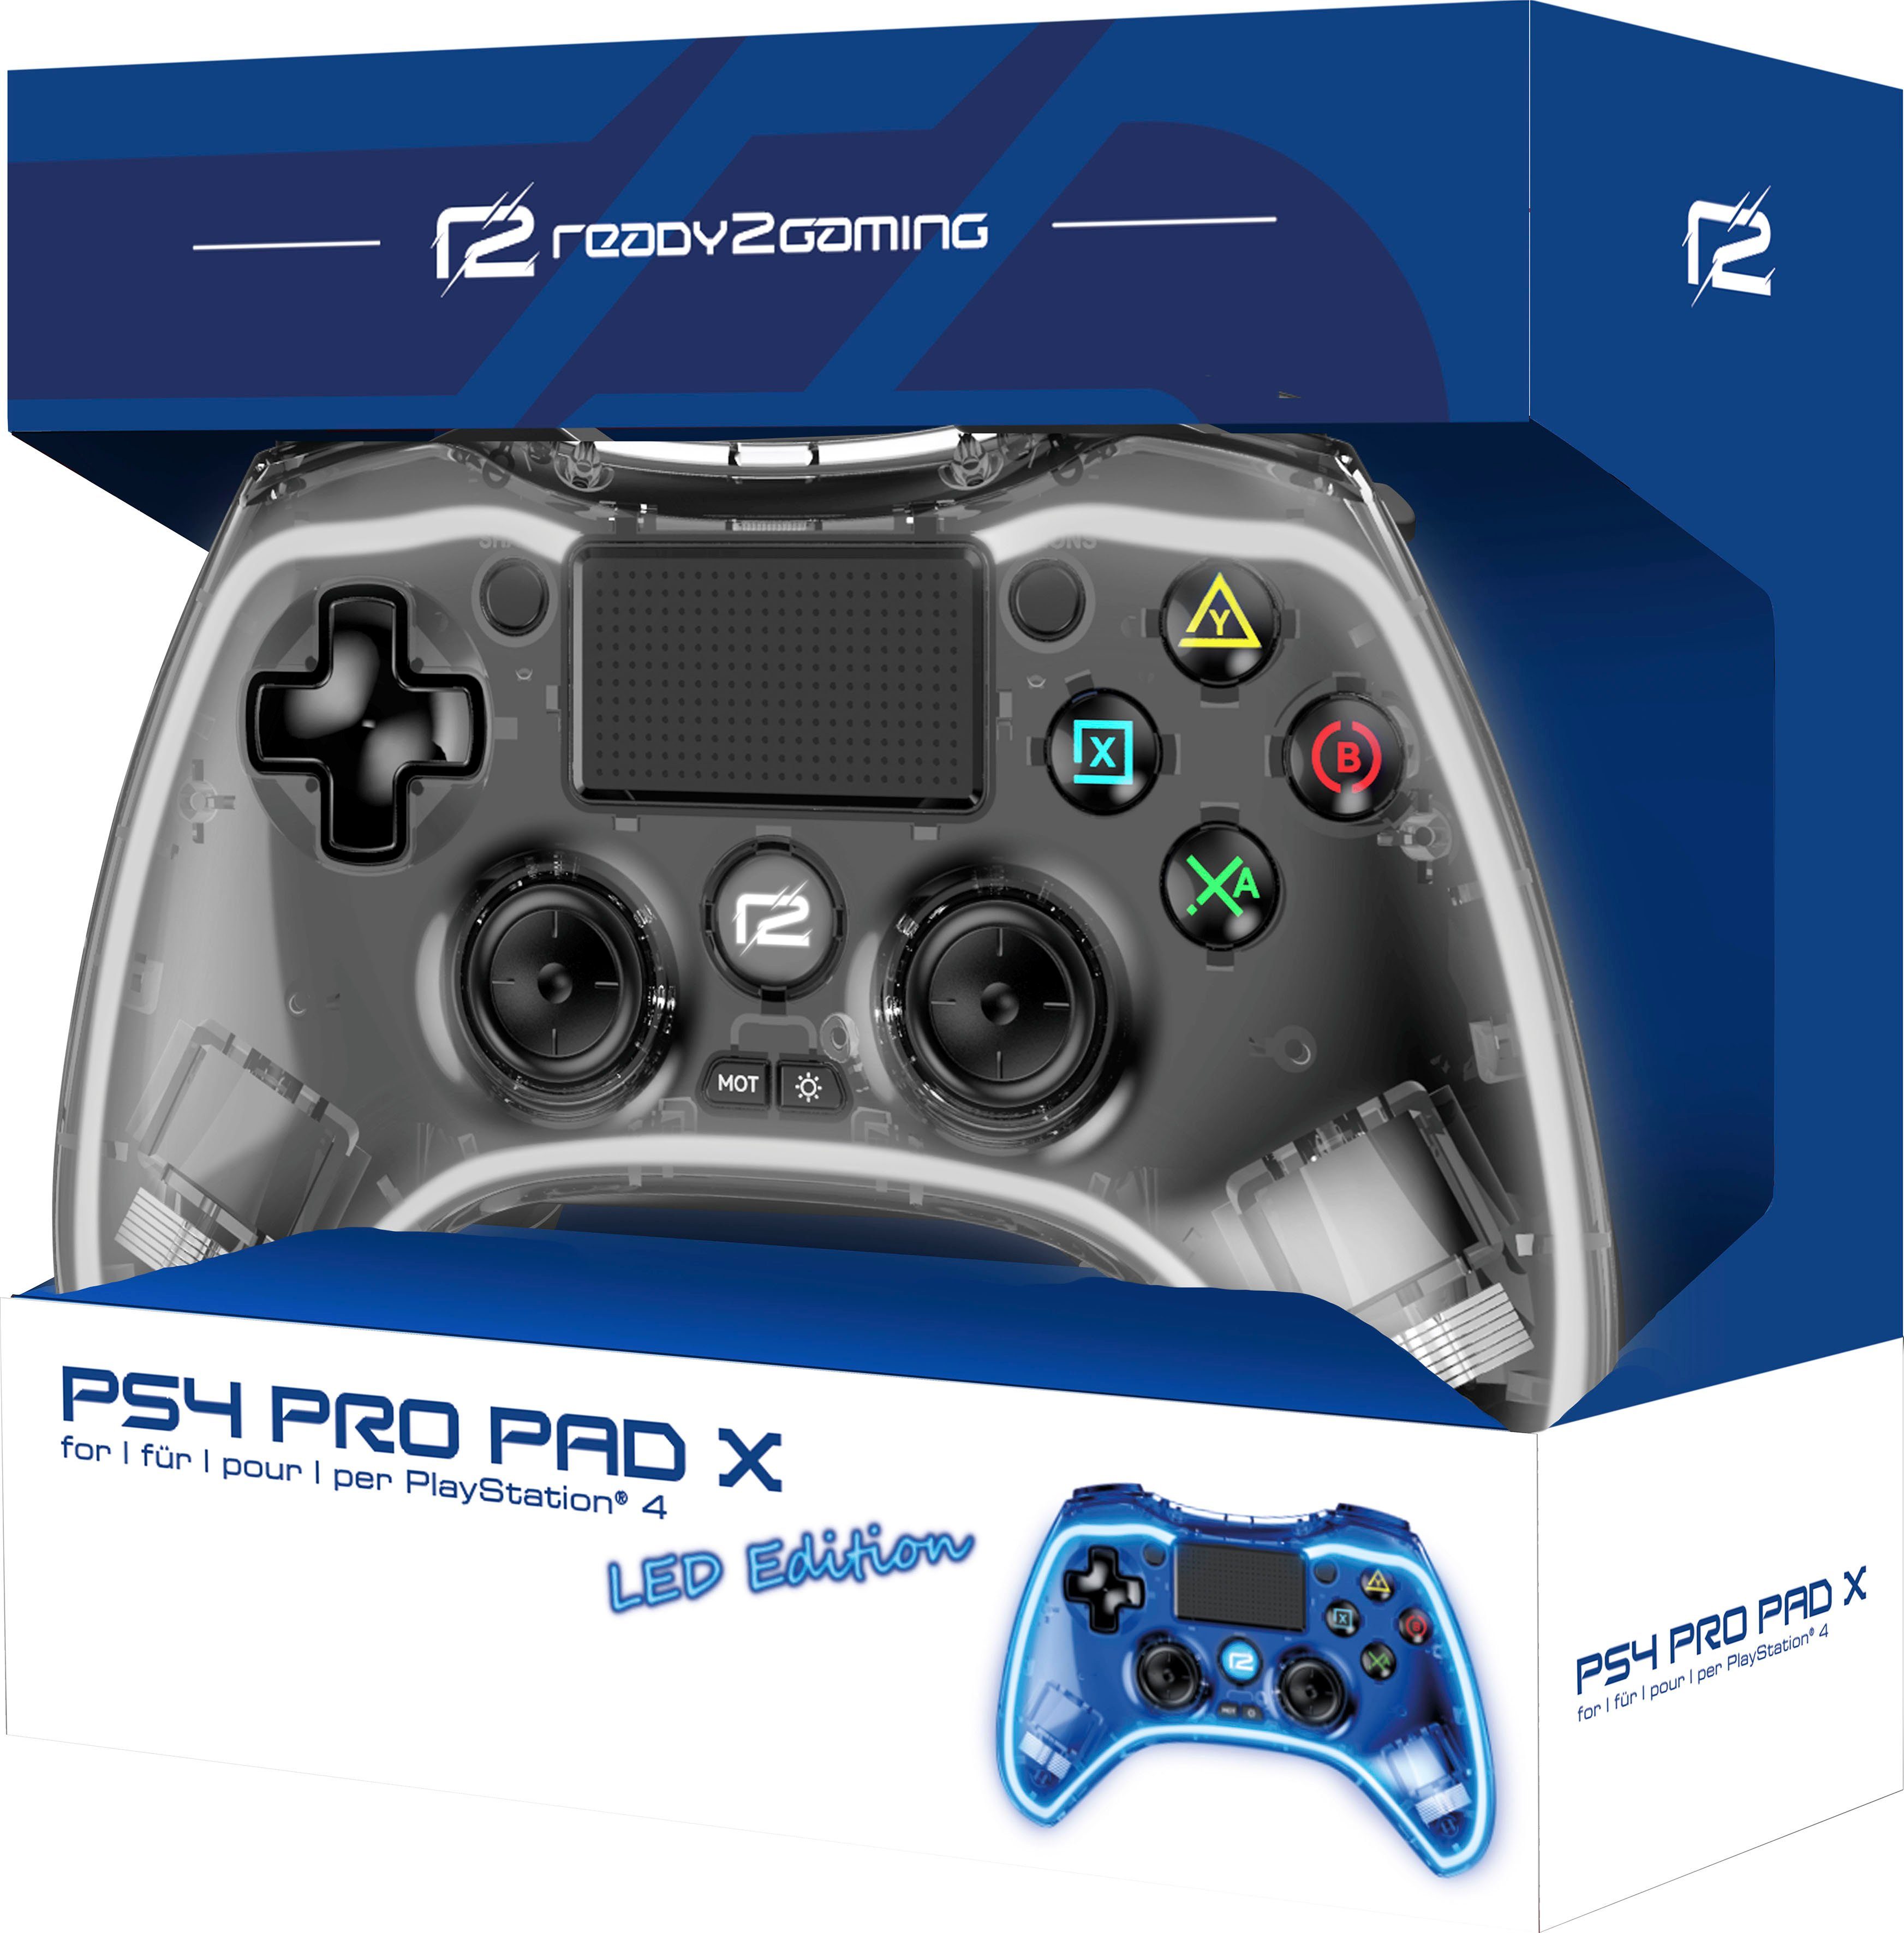 Ready2gaming PS4 Pro Pad X blauer Led Controller mit Beleuchtung Edition LED transparent